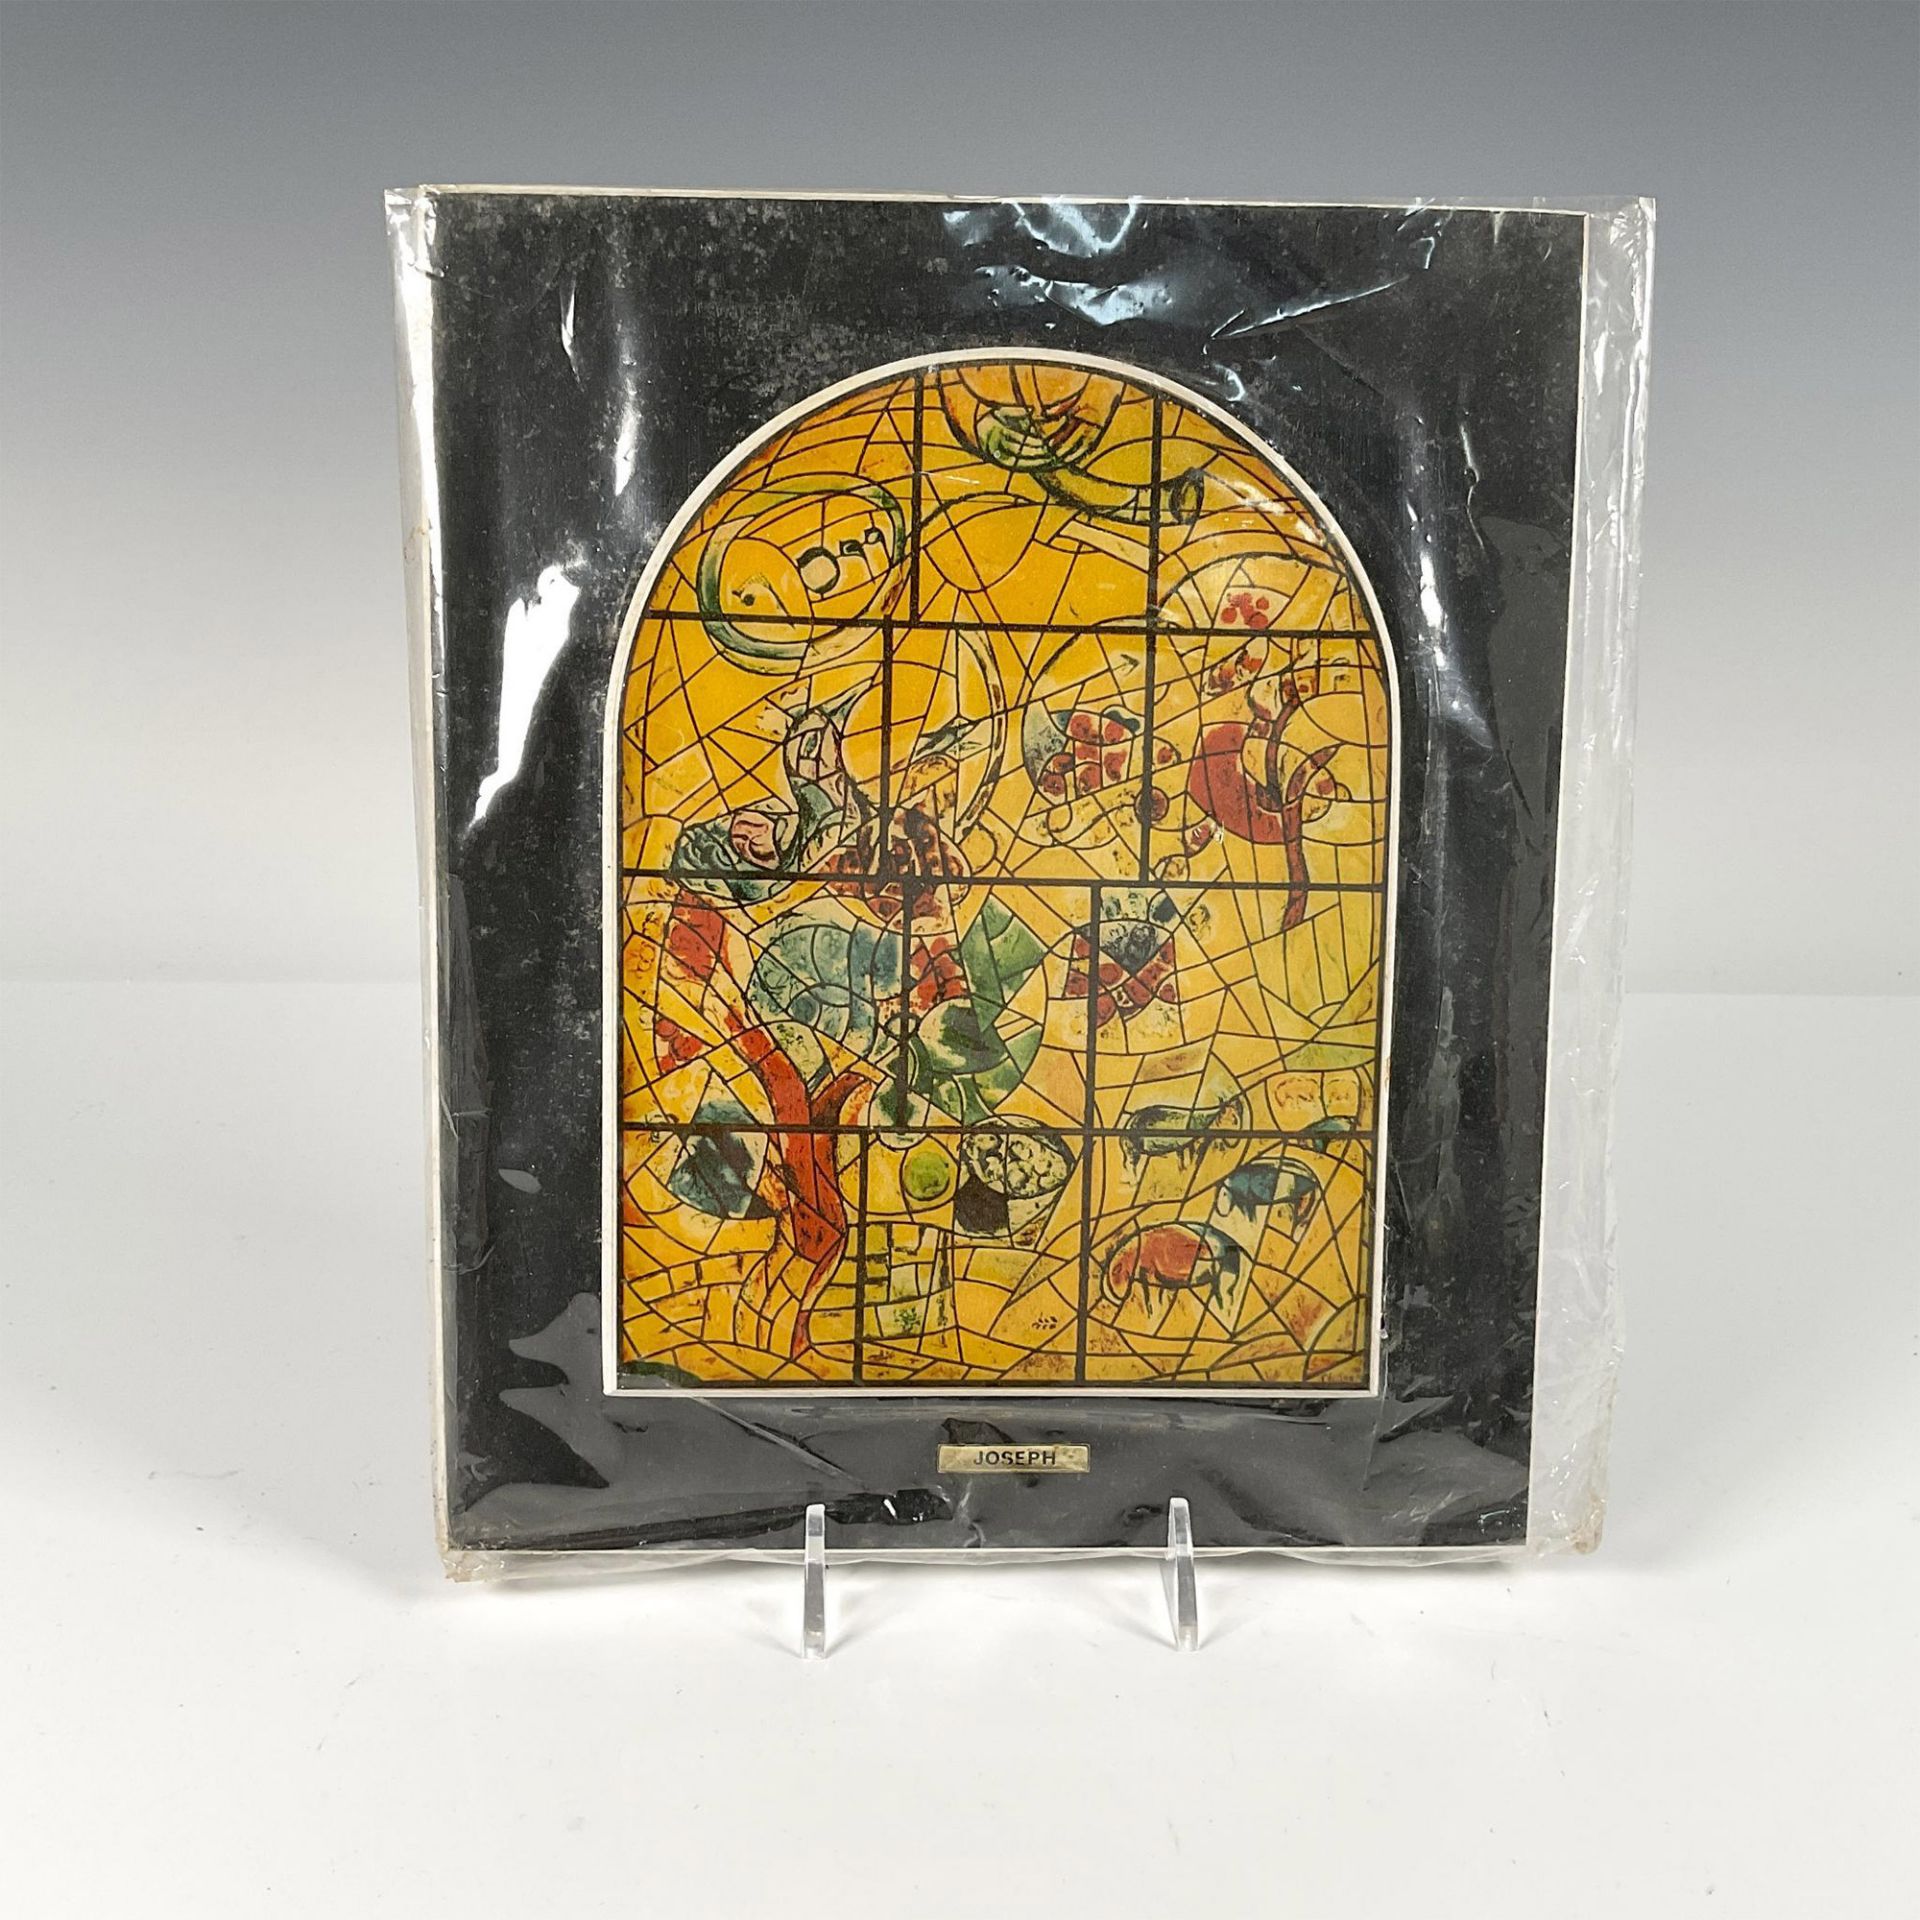 13pc After Marc Chagall by Avissar Wooden Plaques, The 12 Stained Glass Windows - Image 19 of 20